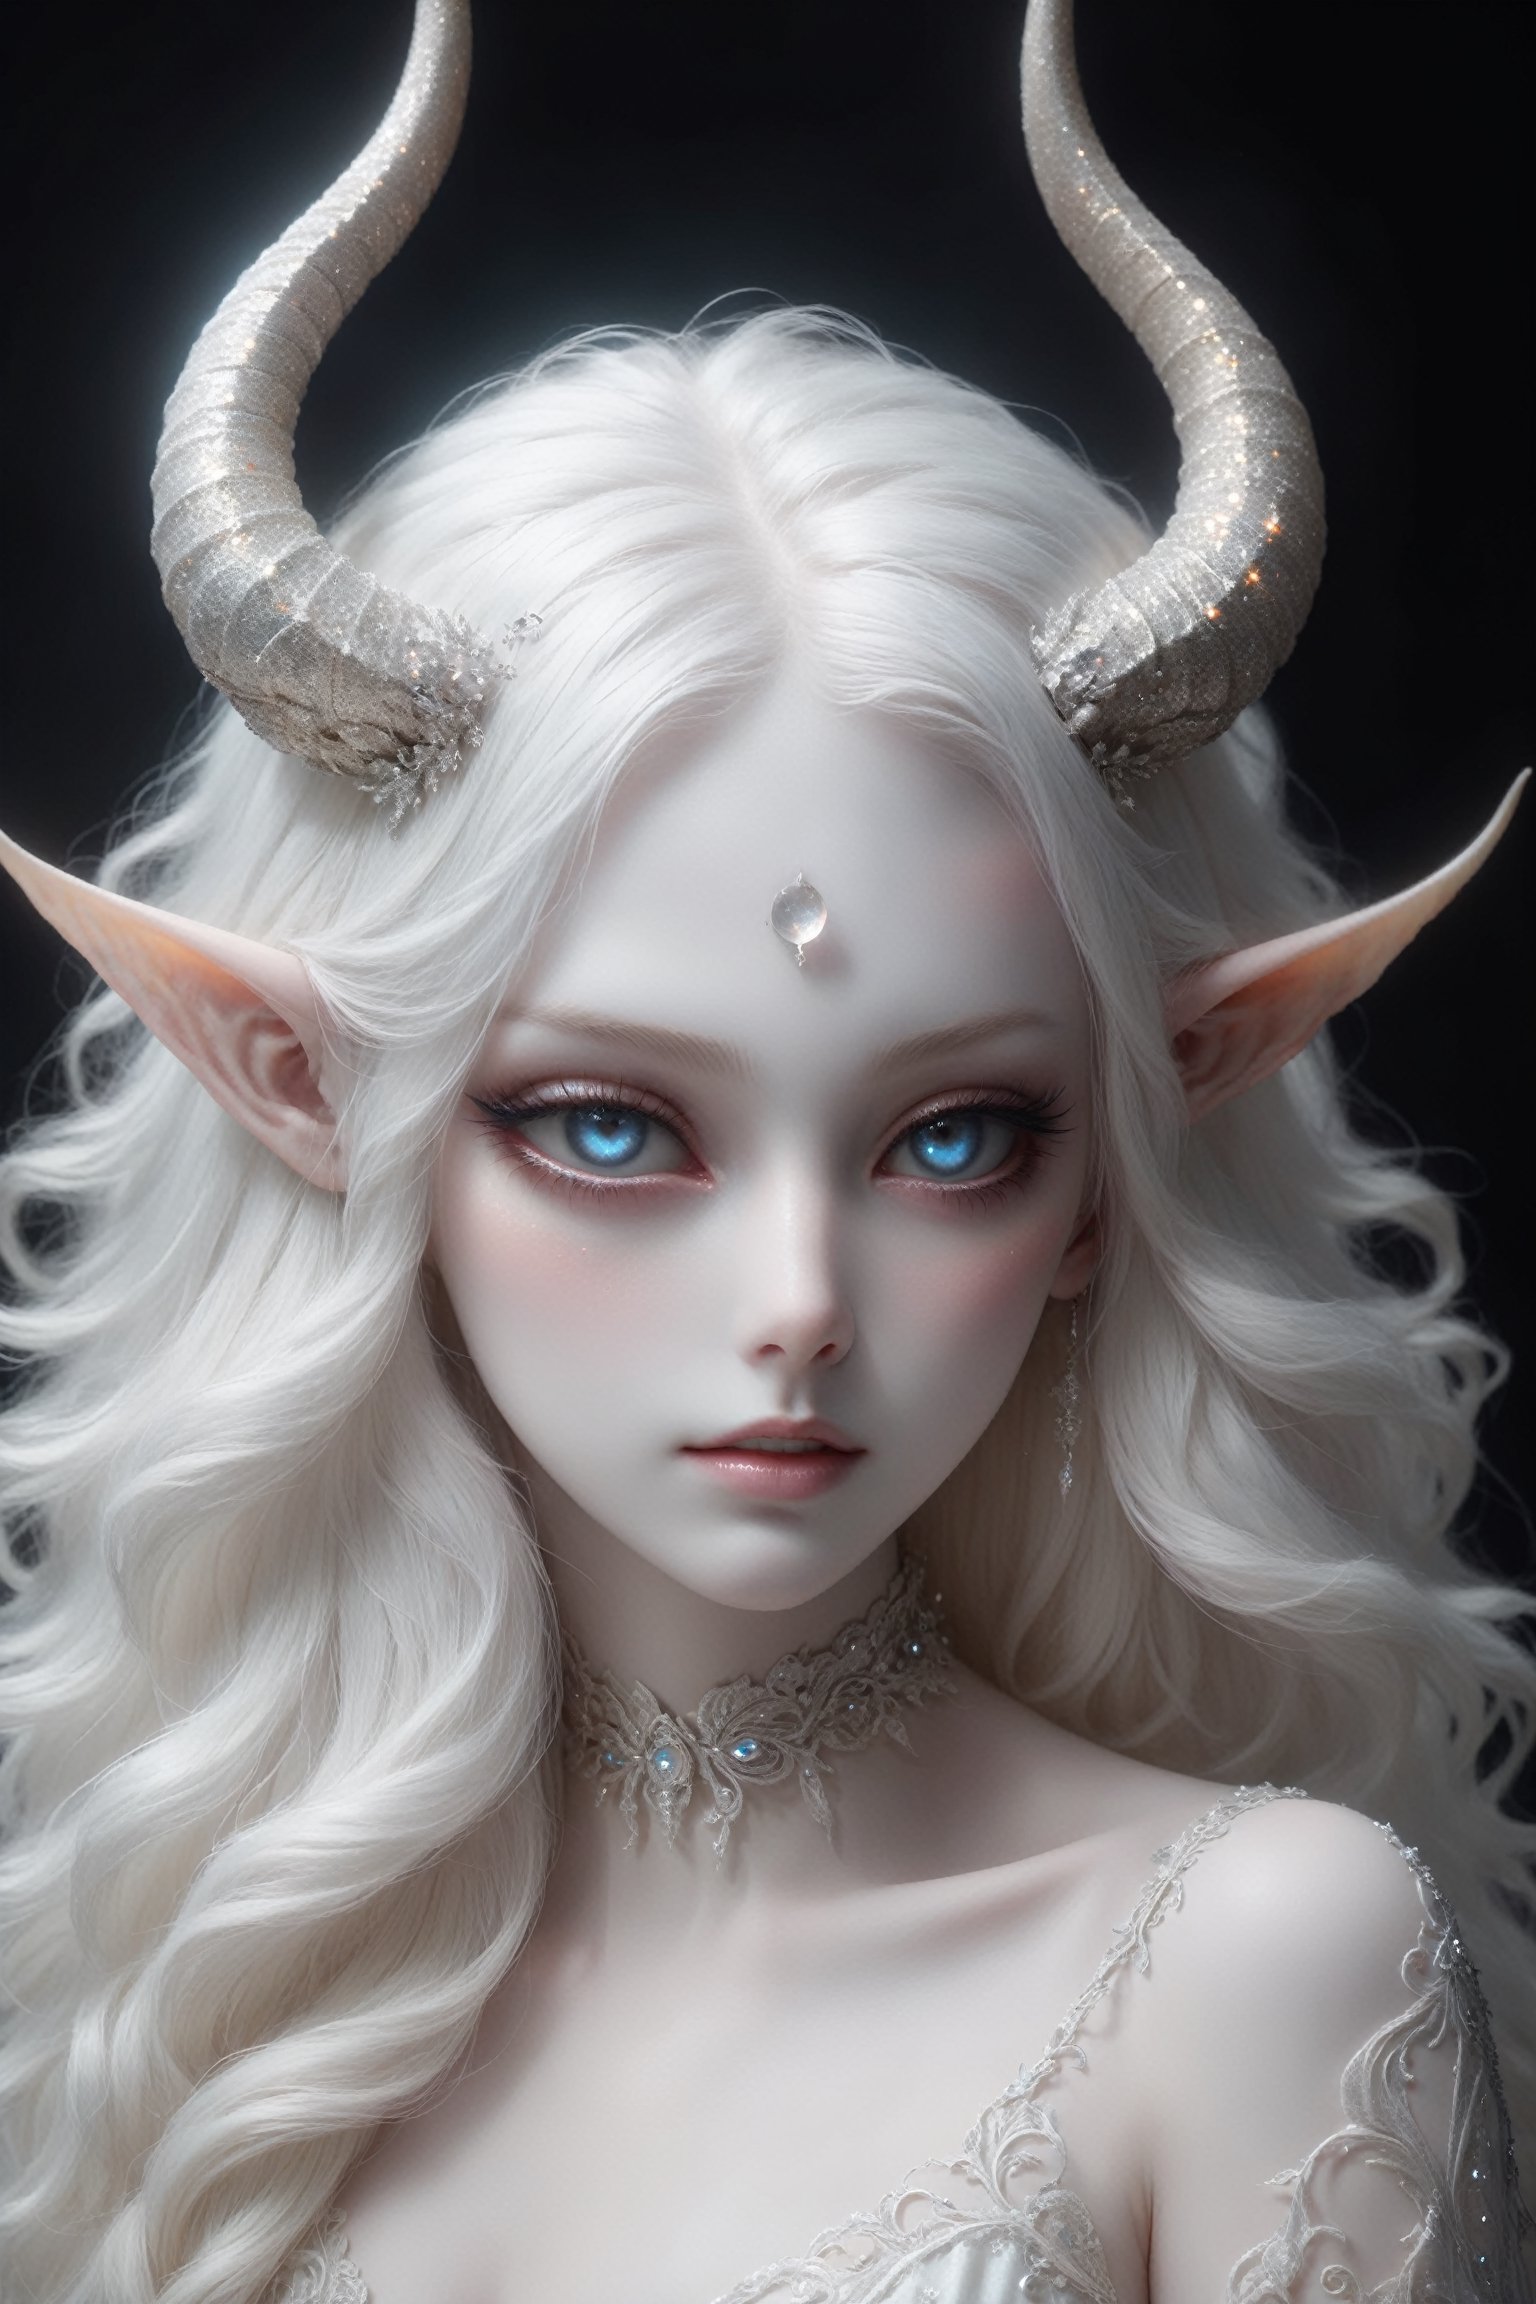 (upper body), (long intricate horns:1.2), sensual albino demon girl with enchantingly beautiful, alabaster skin, {{{naked breasts}}}, thinking, thoughtful, A benevolent smile, girl has beautiful deep eyes, soft expression, Depth and Dimension in the Pupils,  Her porcelain-like white skin reflects an almost celestial glow, highlighting her ethereal nature, ornate jewels, the scene is Illuminated with soft enchanting light to accentuate the magical and mysterious atmosphere, goth person, realistic, Wonder of Art and Beauty, ghost person,ghost person,F41Arm0rXL ,DonMM4g1cXL ,glitter